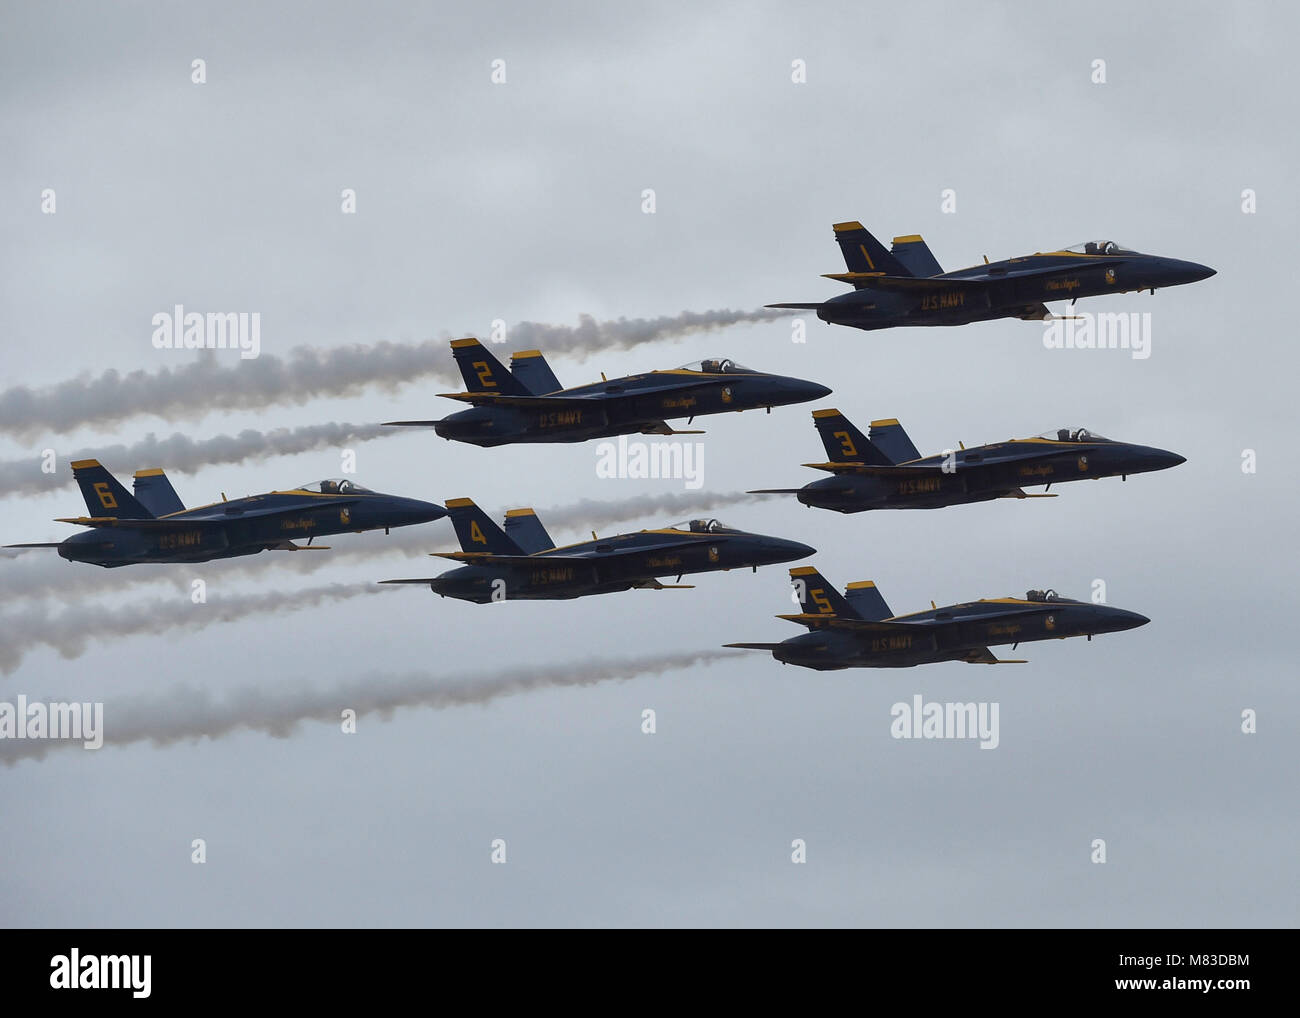 180310-N-ZC358-242  NAF EL CENTRO, Calif. (March 10, 2018) The Blue Angels Delta performs the Delta Flat Pass during the NAF El Centro 2018 Air Show. The Blue Angels are scheduled to perform more than 60 demonstrations at more than 30 locations across the U.S. in 2018. (U.S. Navy photo by Mass Communication Specialist 2nd Class Jess Gray/Released) Stock Photo